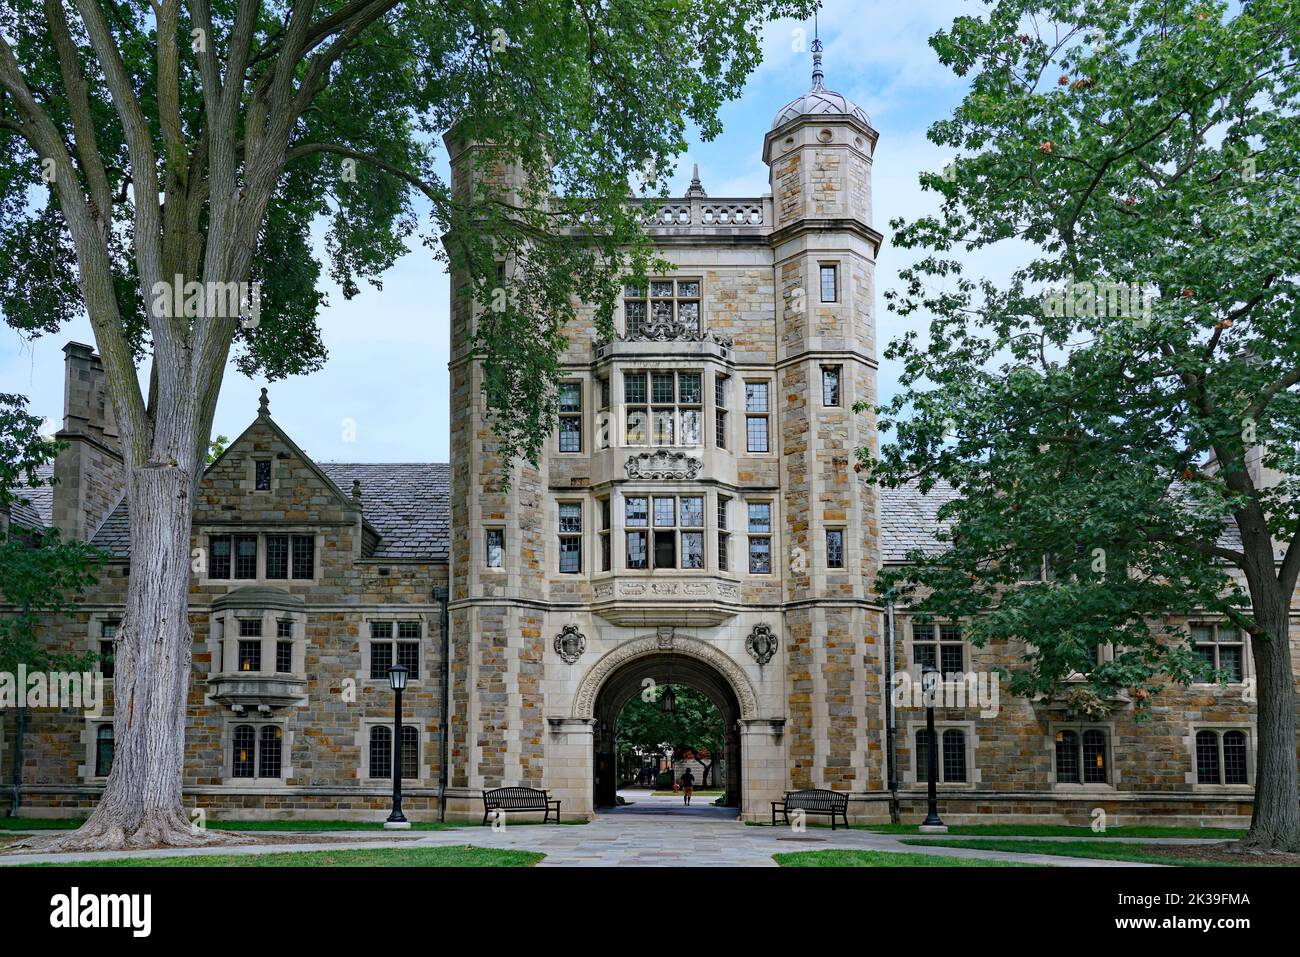 Ornate gothic style architecture at the University of Michigan, with an archway leading into a courtyard Stock Photo